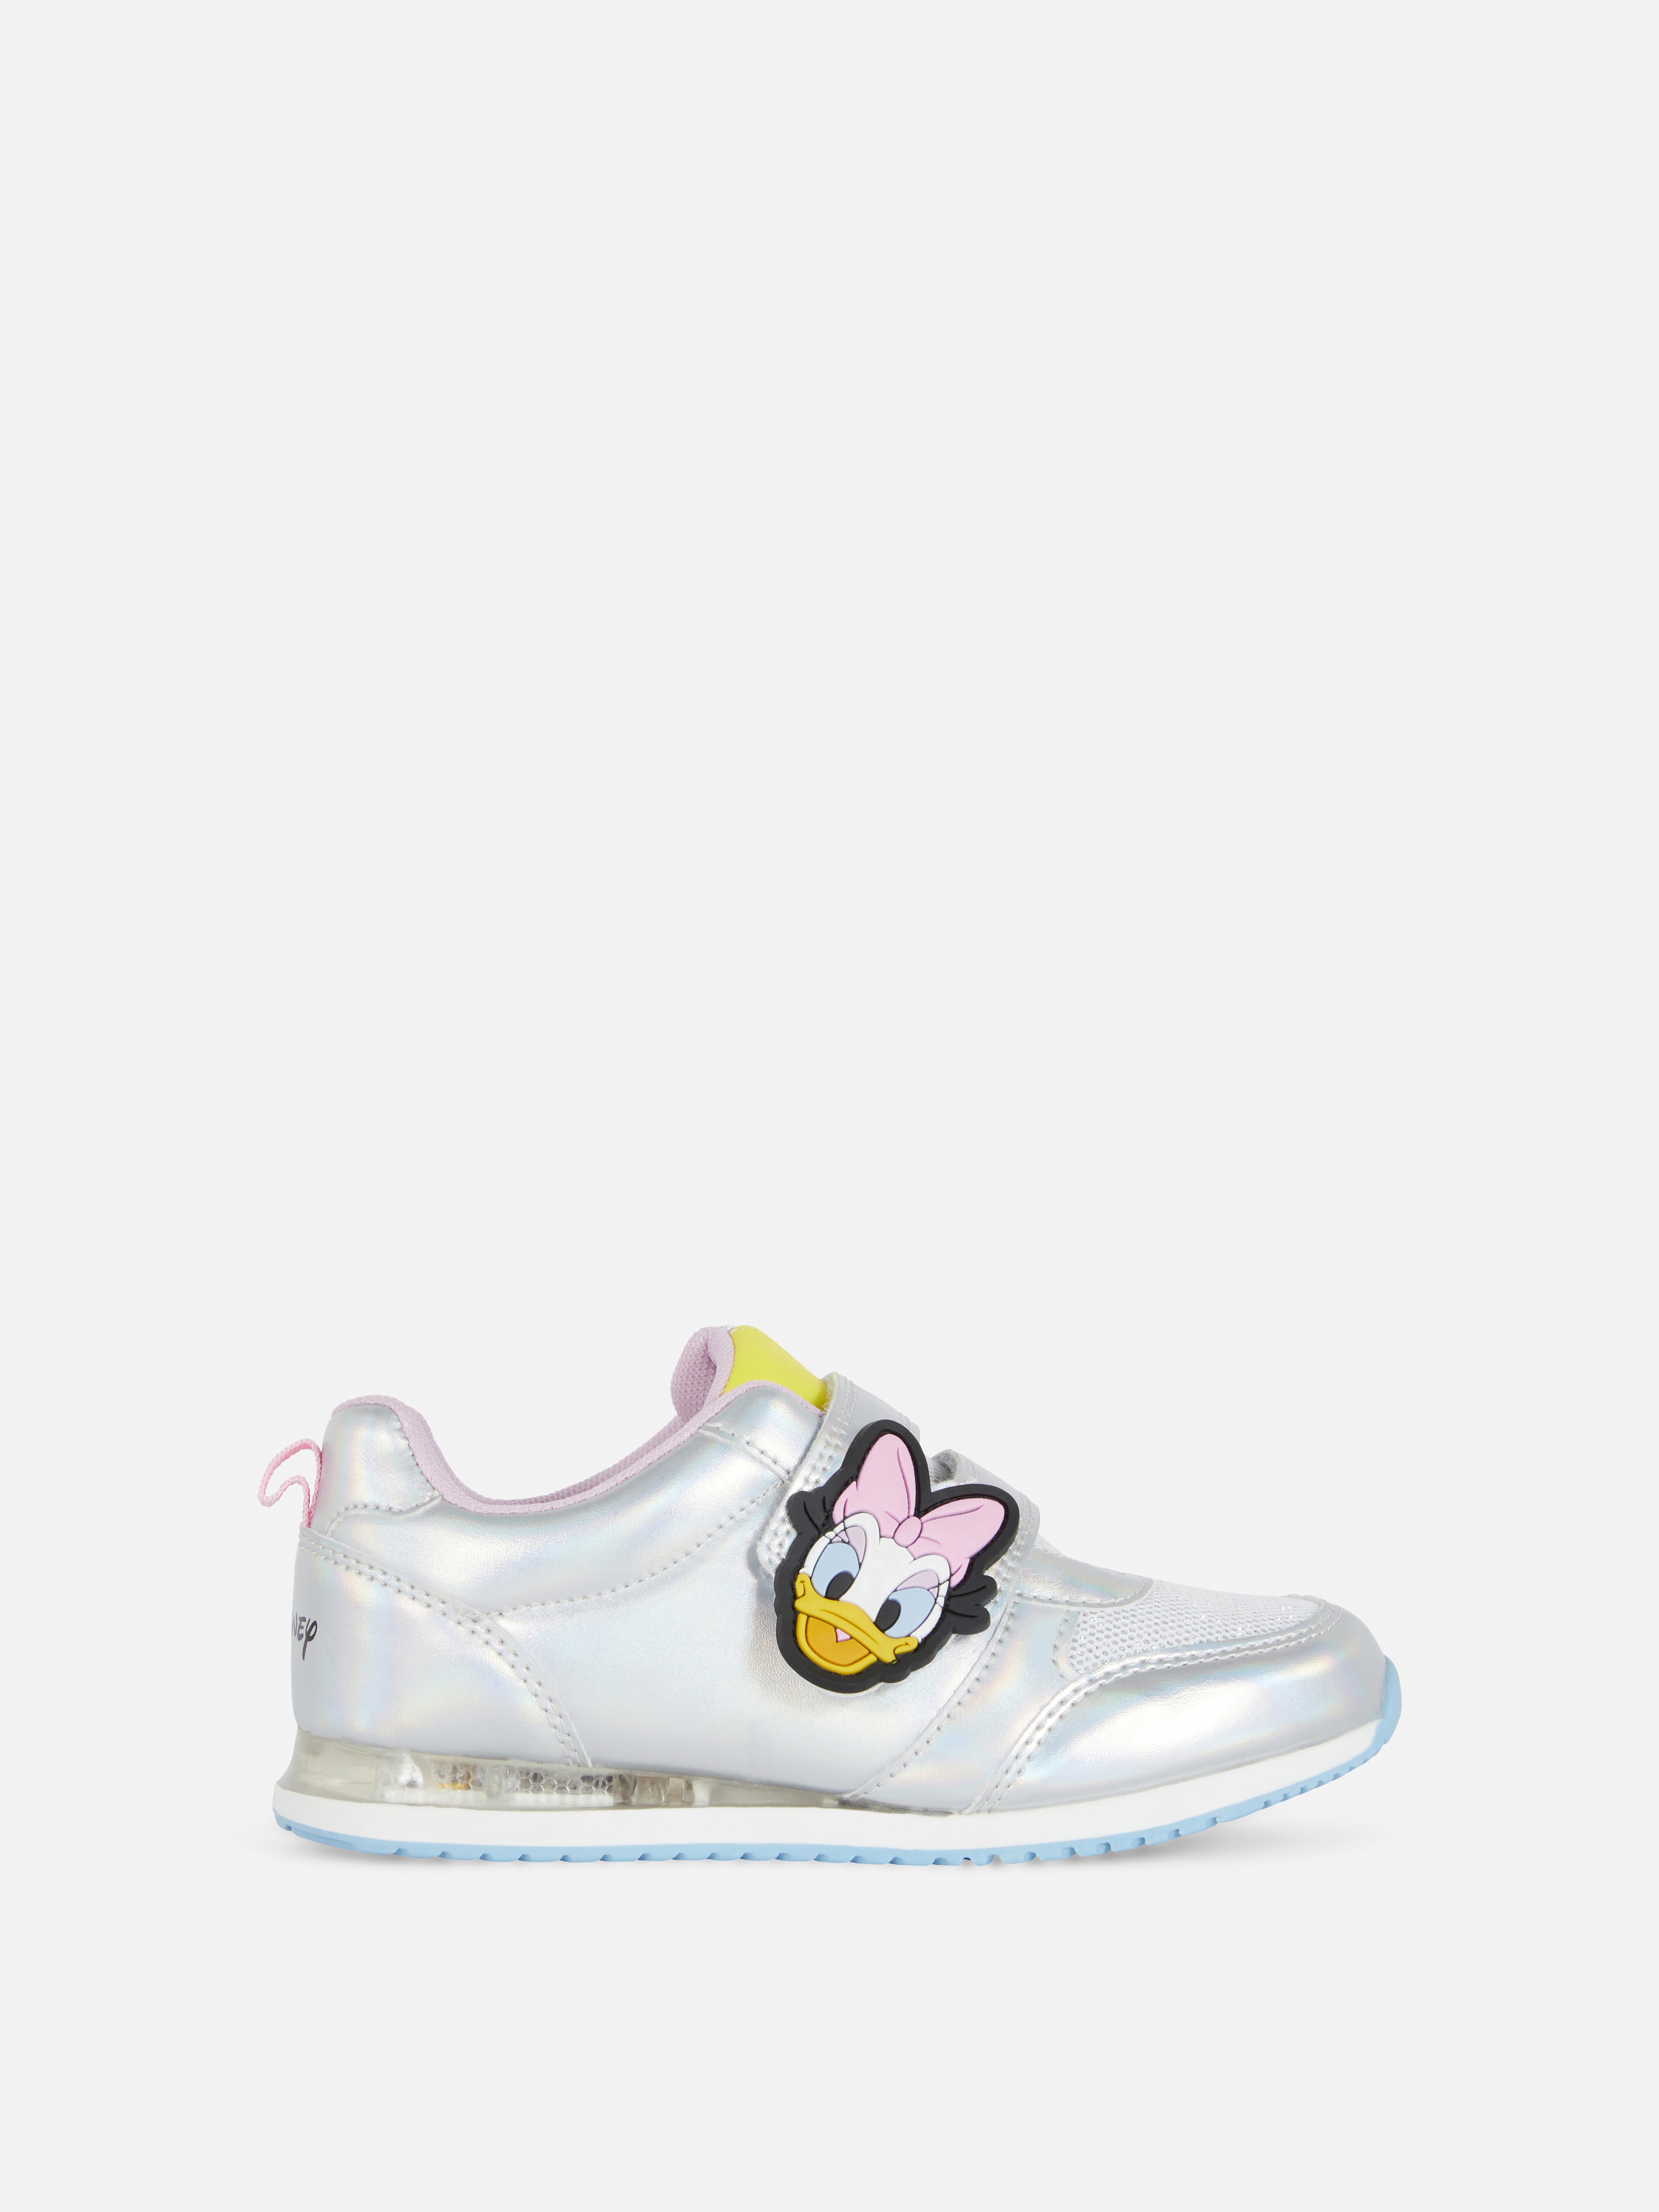 Disney’s Minnie Mouse and Daisy Duck Holographic Trainers